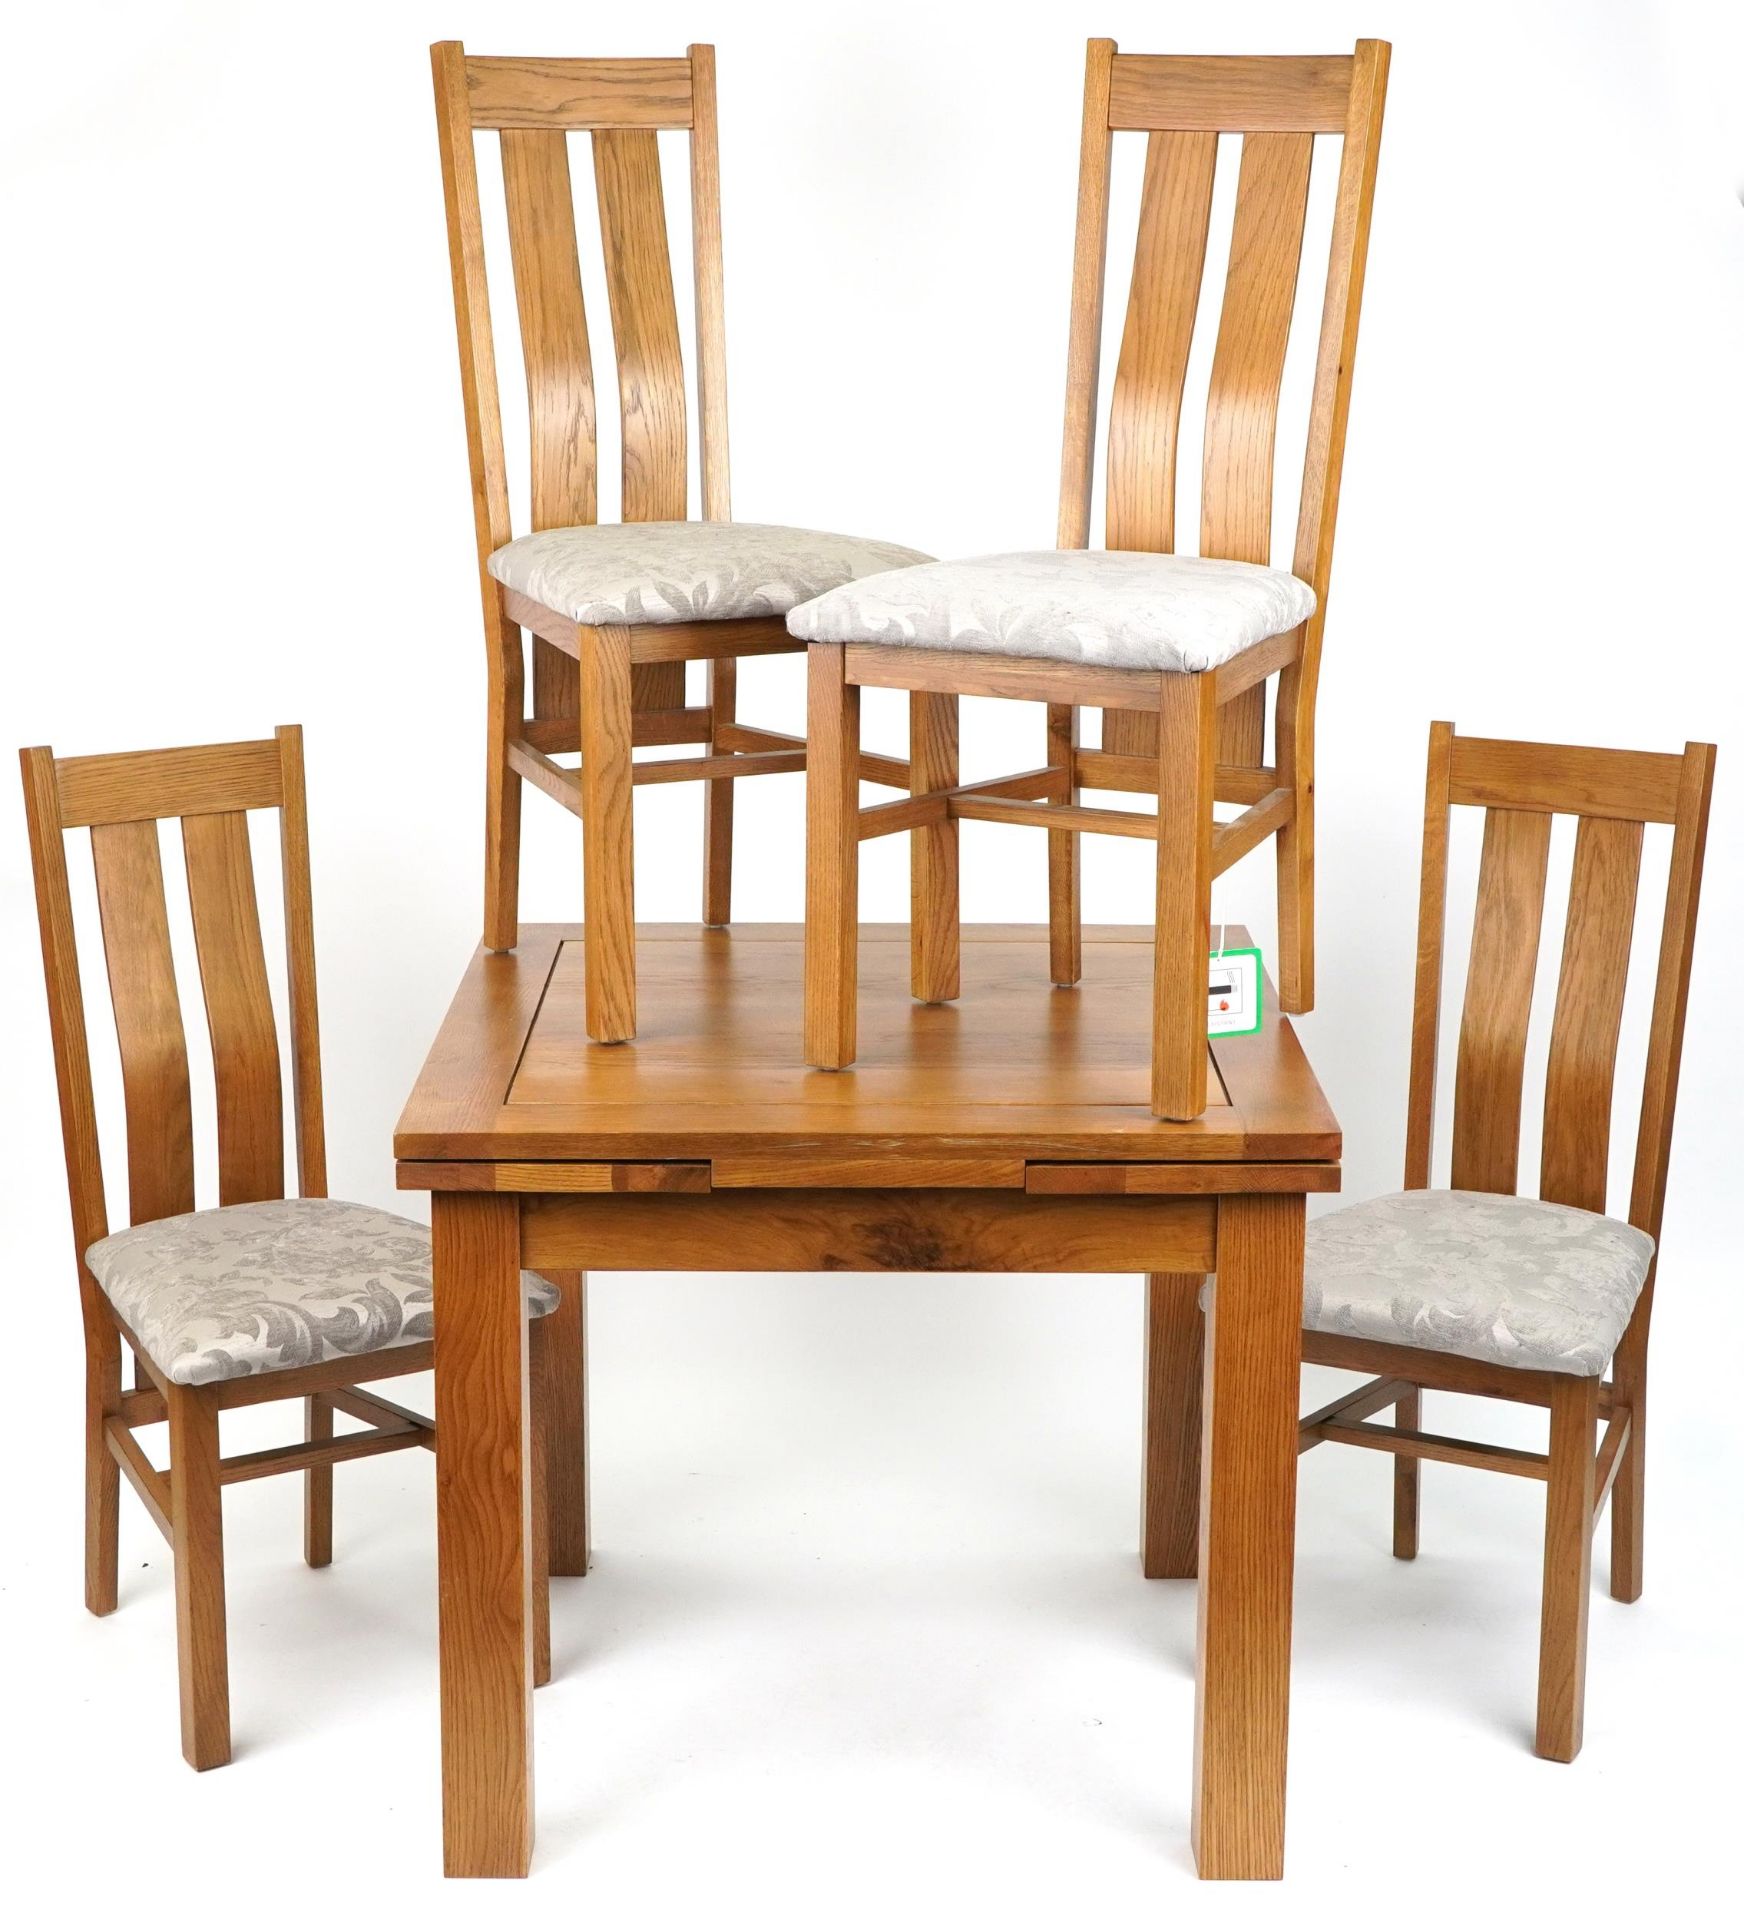 Contemporary golden oak extending dining table with four chairs having floral upholstered cushion